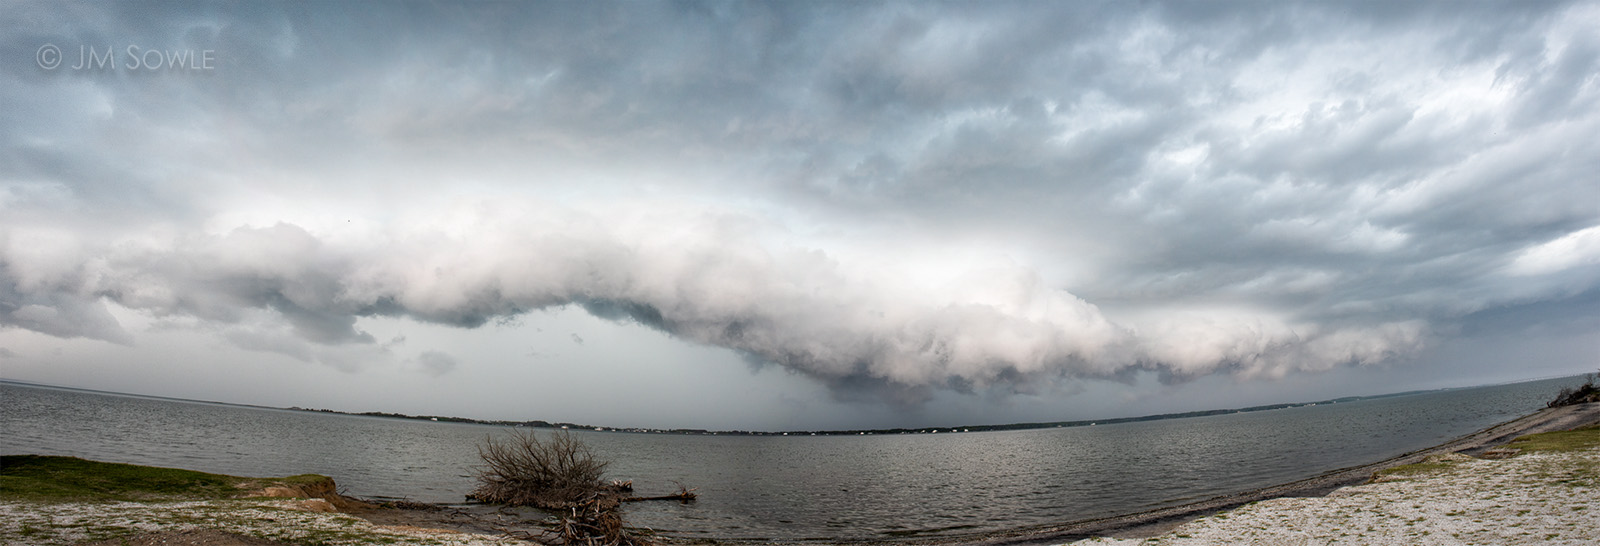 _JIM0157-0162_Pano_1600.jpg - This six-shot pano shows a cool squall line that moved through on Wednesday.  Generally the weather was really good for us, and we felt very fortunate.